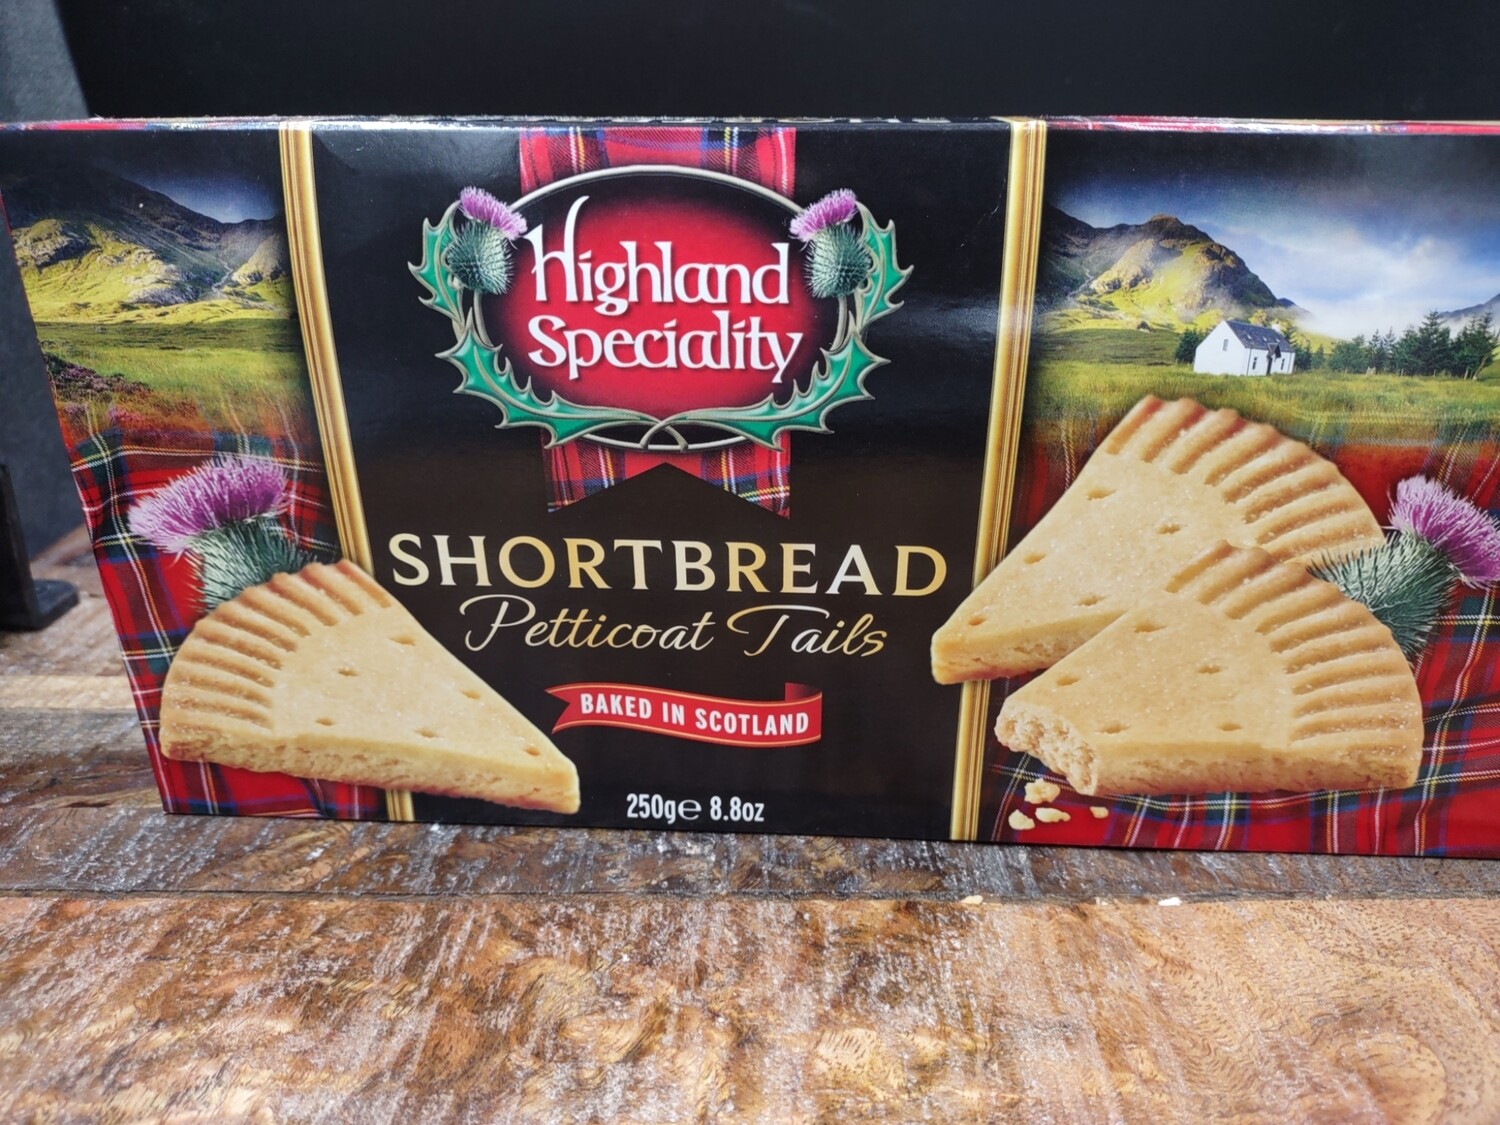 Highland Specialty Shortbread Petticoat Tails 250g